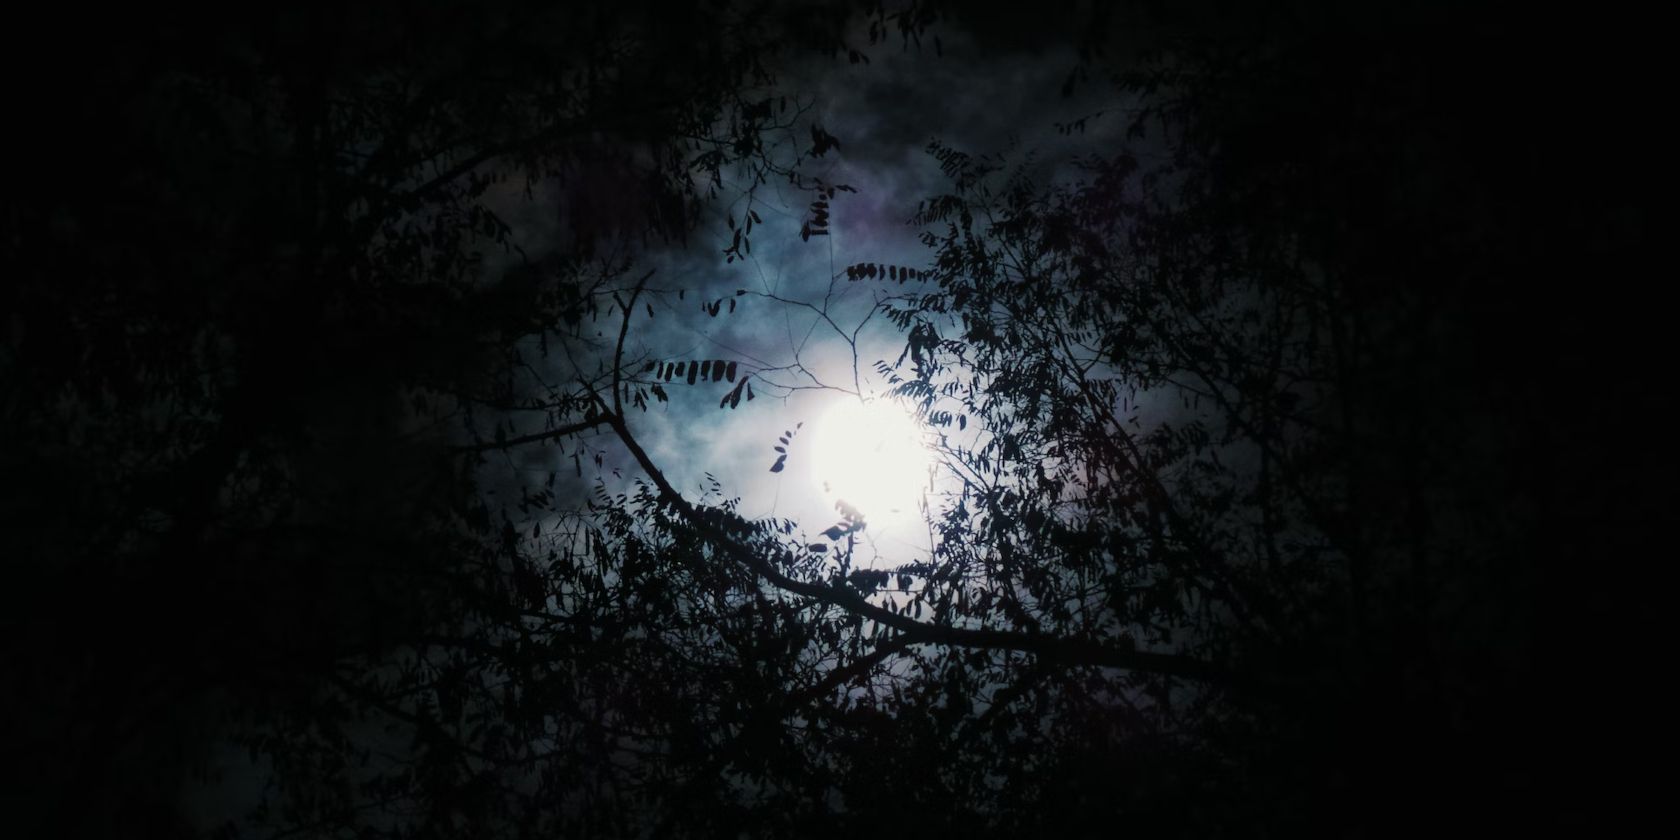 The moon behind clouds as seen through trees